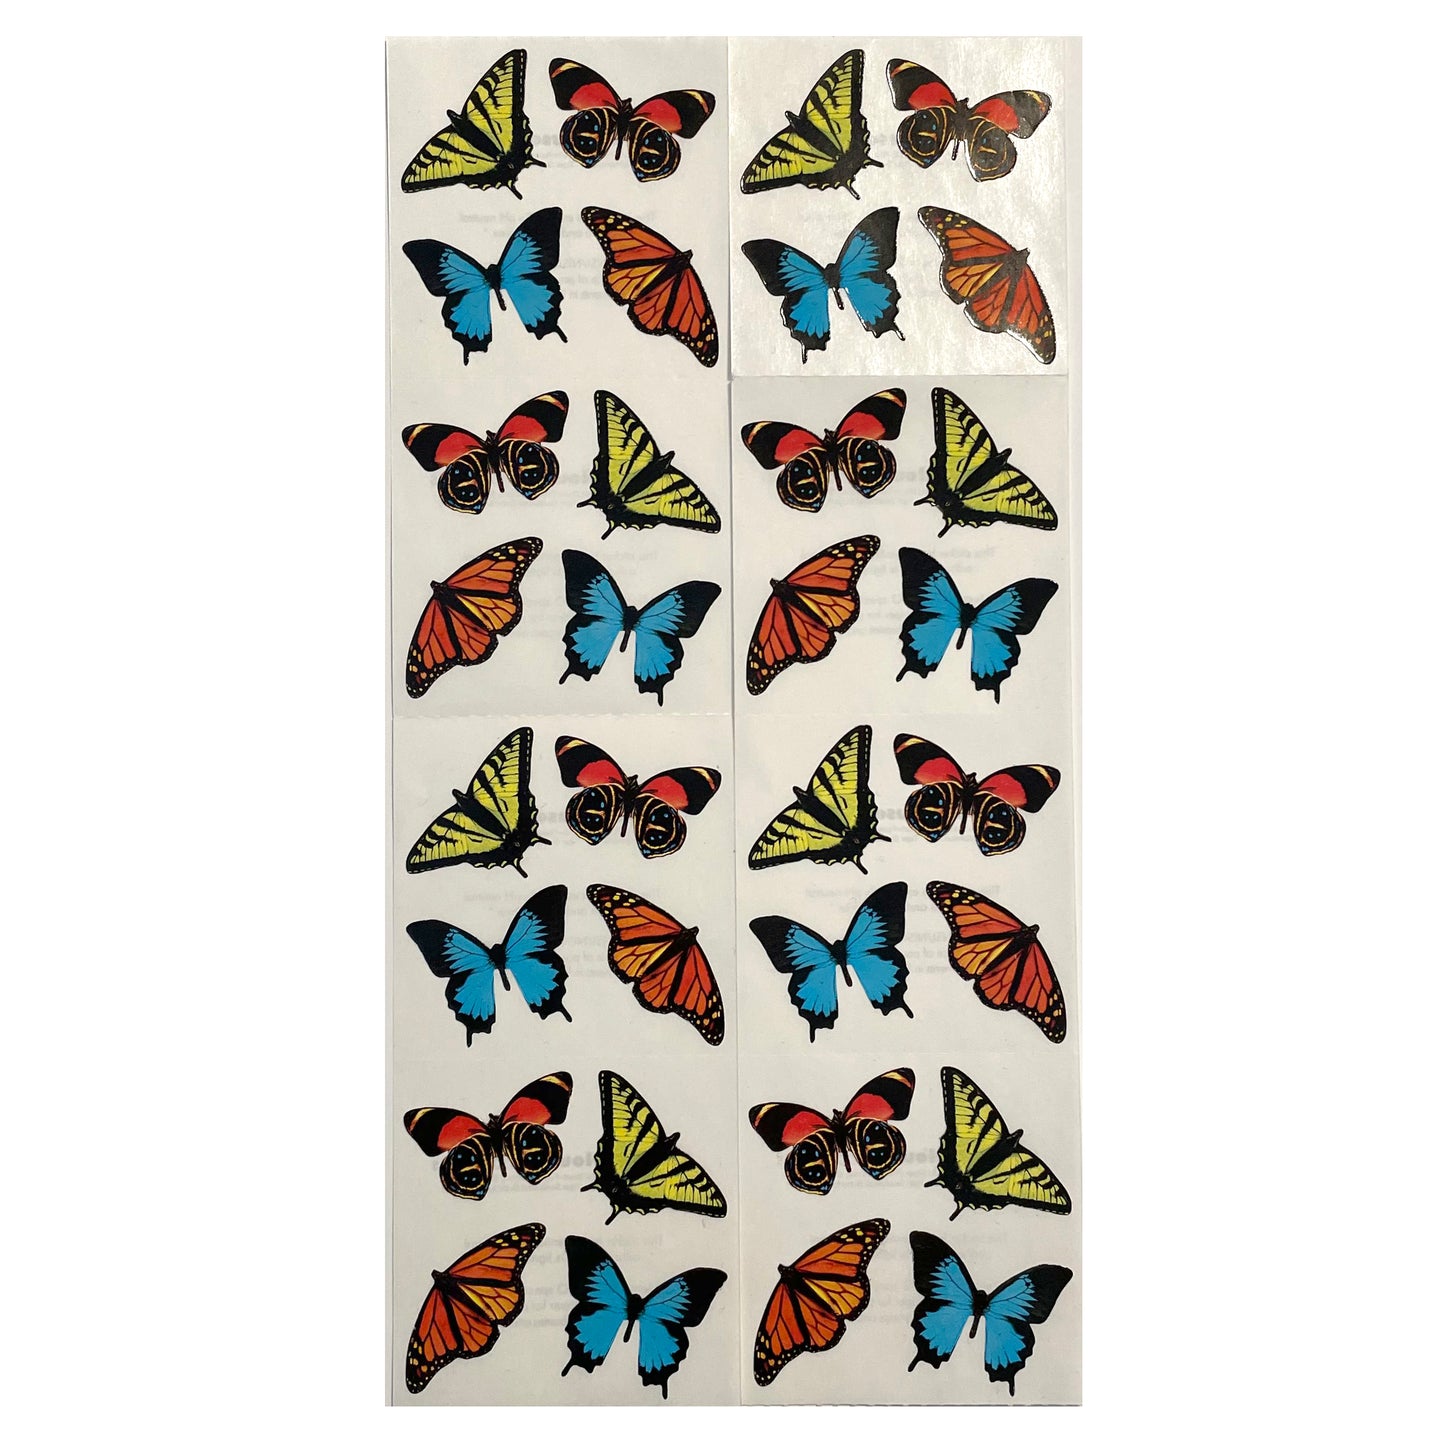 DEALS: 20 Sheets of Butterfly Stickers